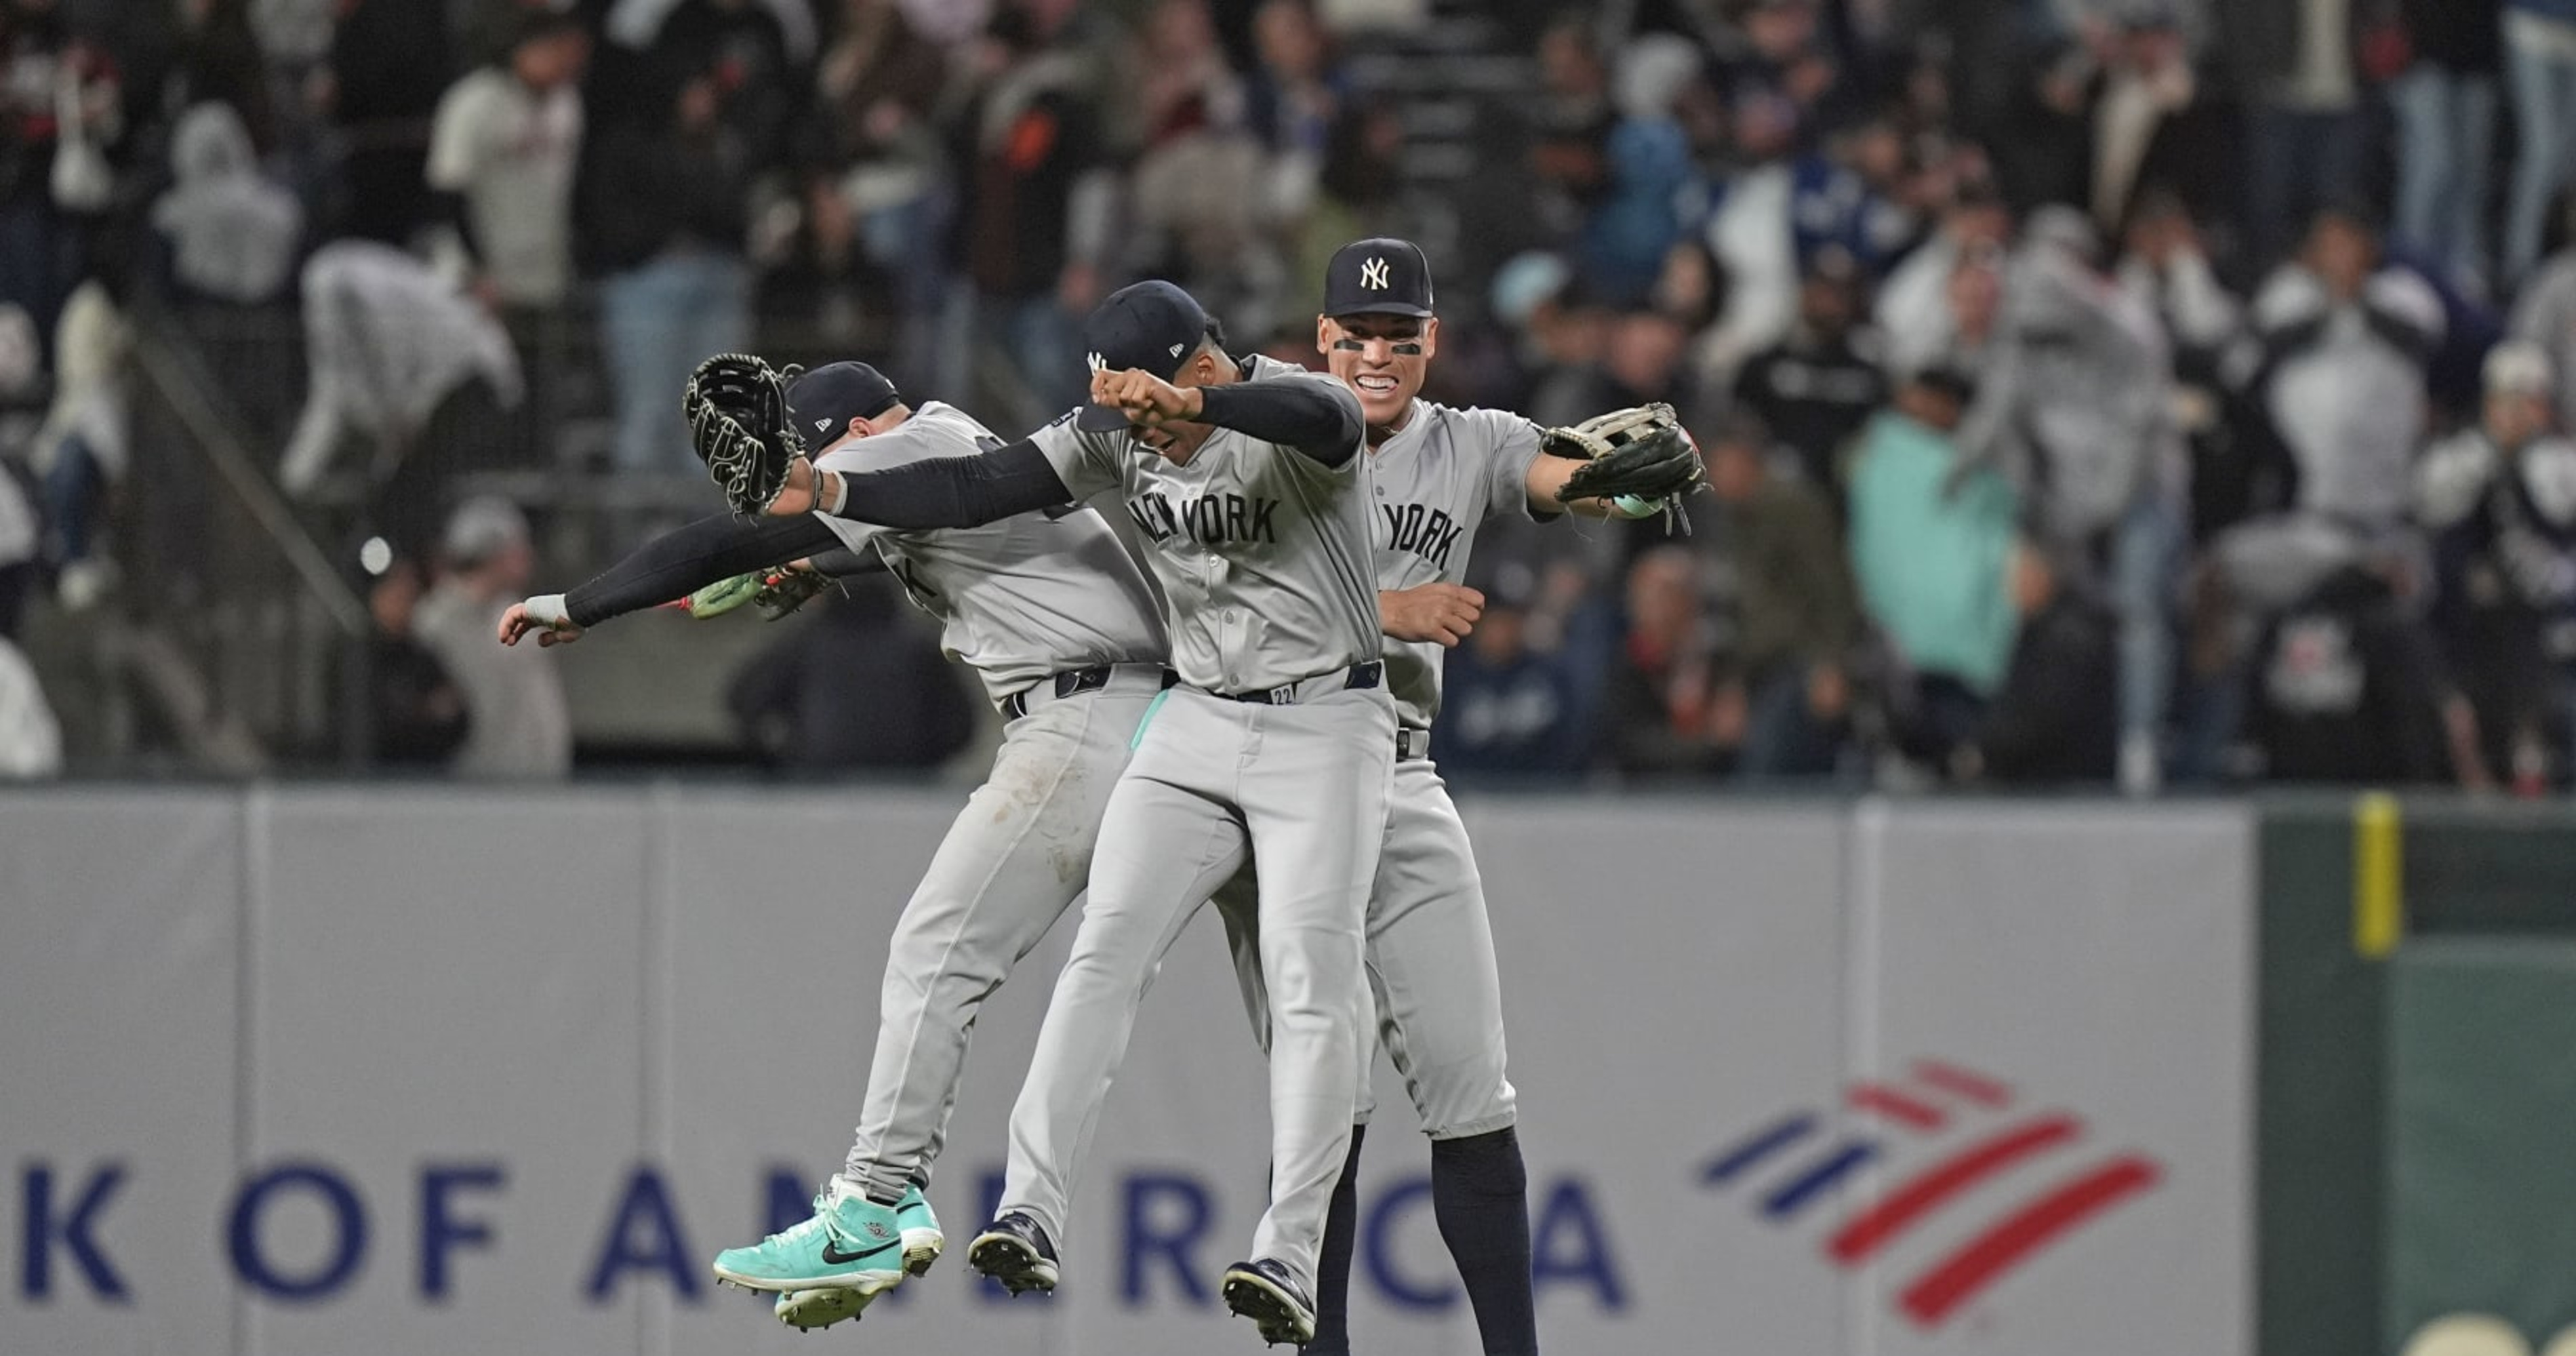 MLB Power Rankings: Yankees vs. Phillies for No. 1, Mariners Join Top 10, Cubs Slide